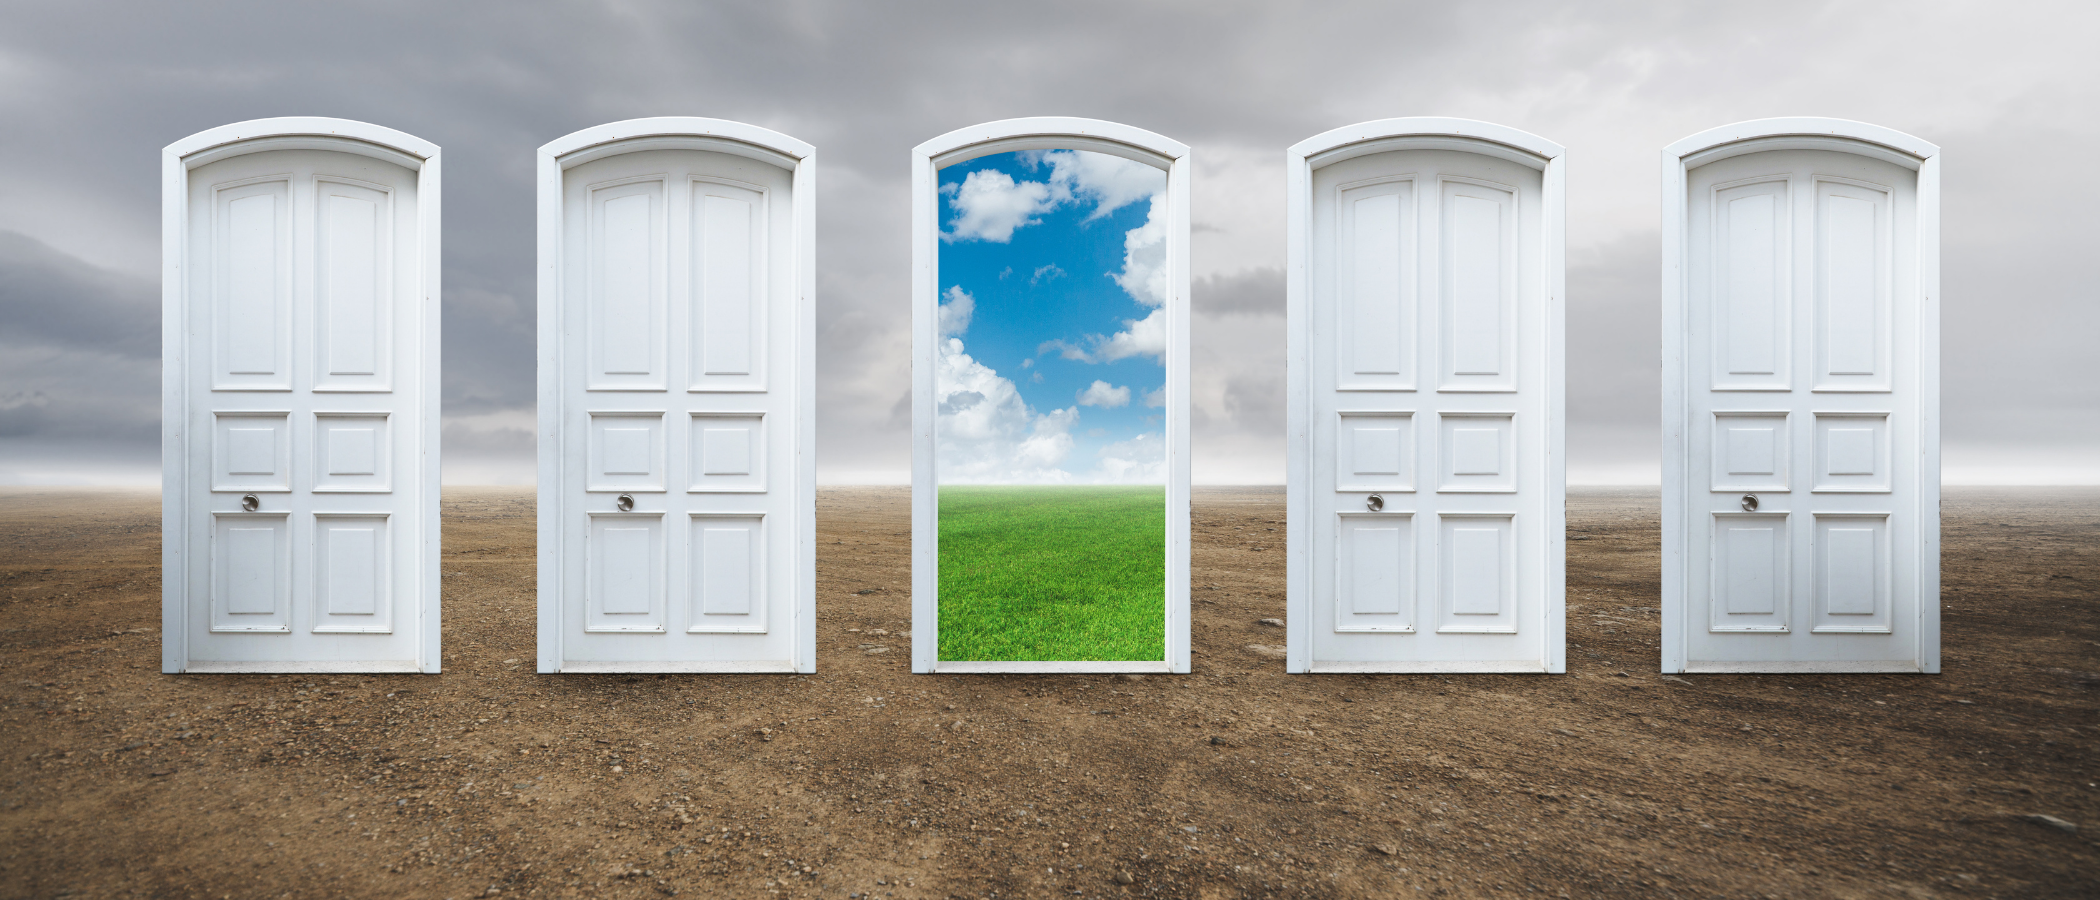 doors on a dry cloudy field, the middle door is open to show a green field and blue skies